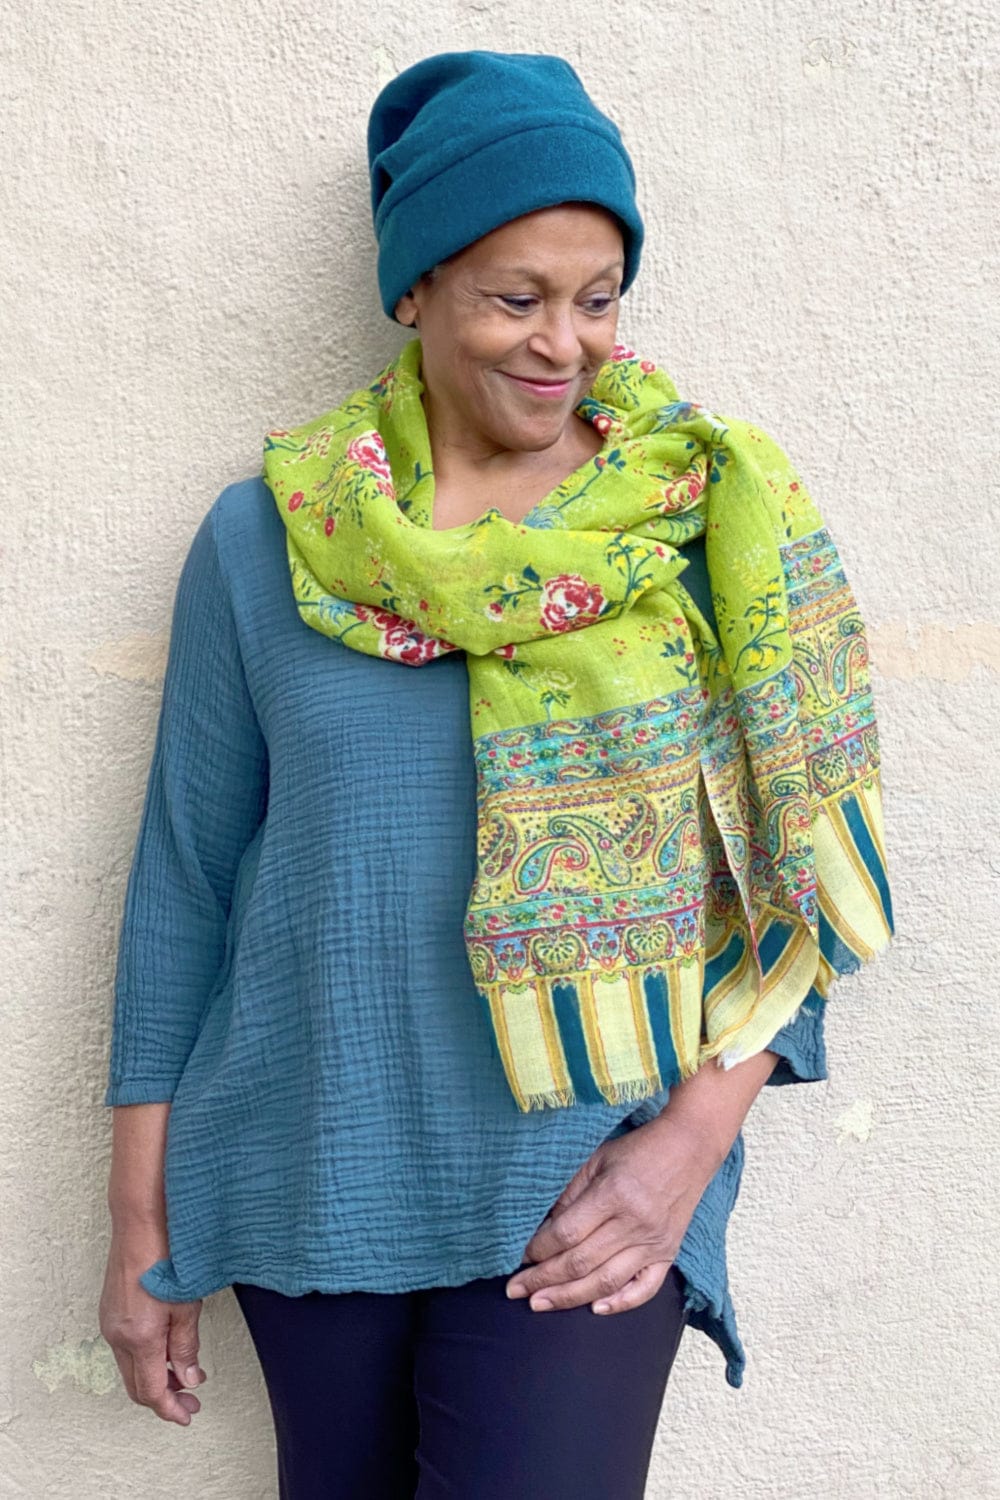 Chartreuse wool scarf with floral, paisly and stripe design worn with a dark teal winter hat on a smiling woman.